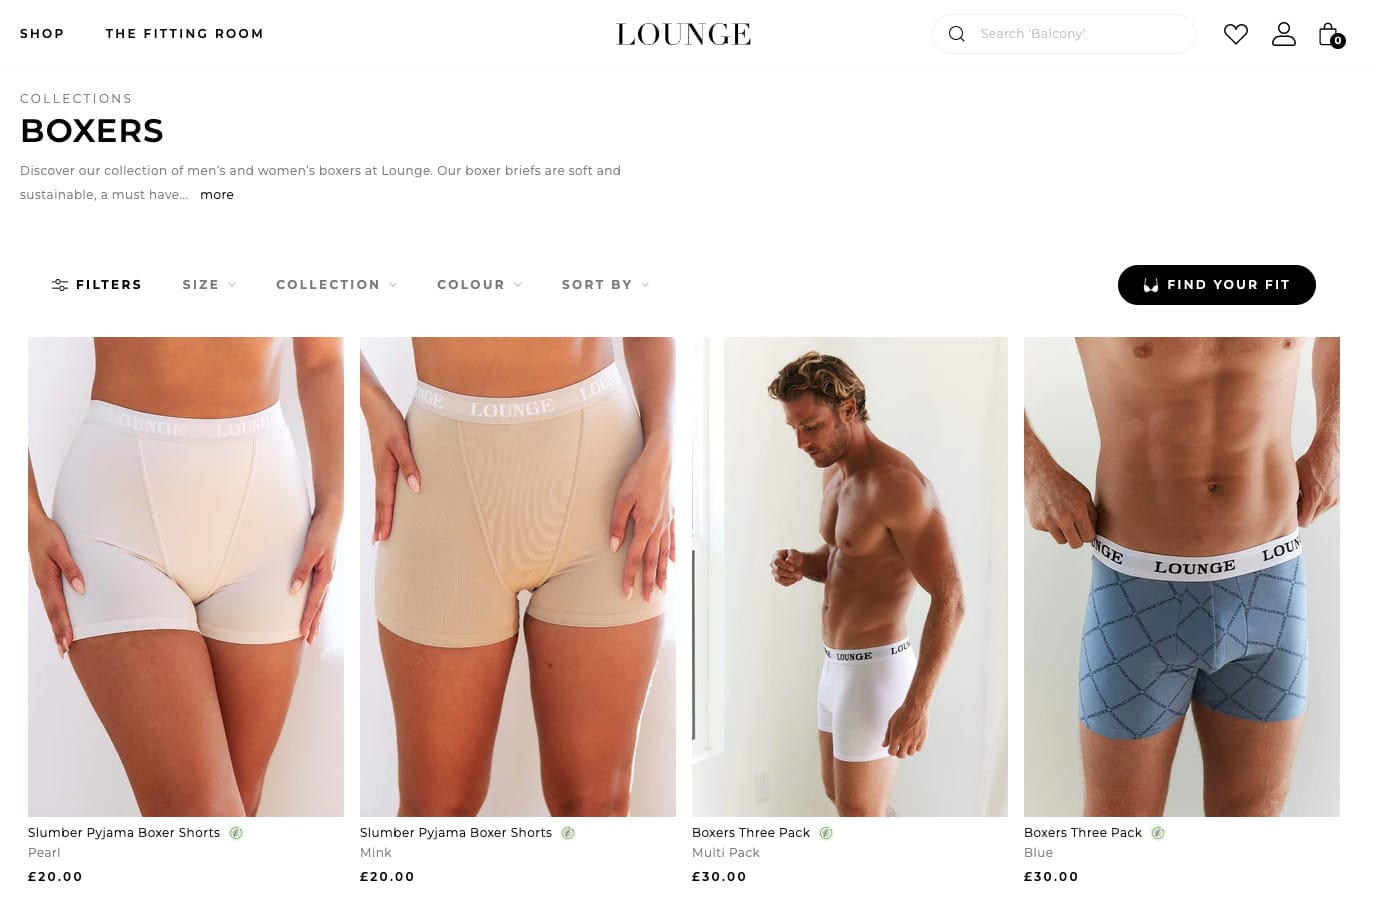 Lounge Underwear teams with Emarsys to gain customer insight